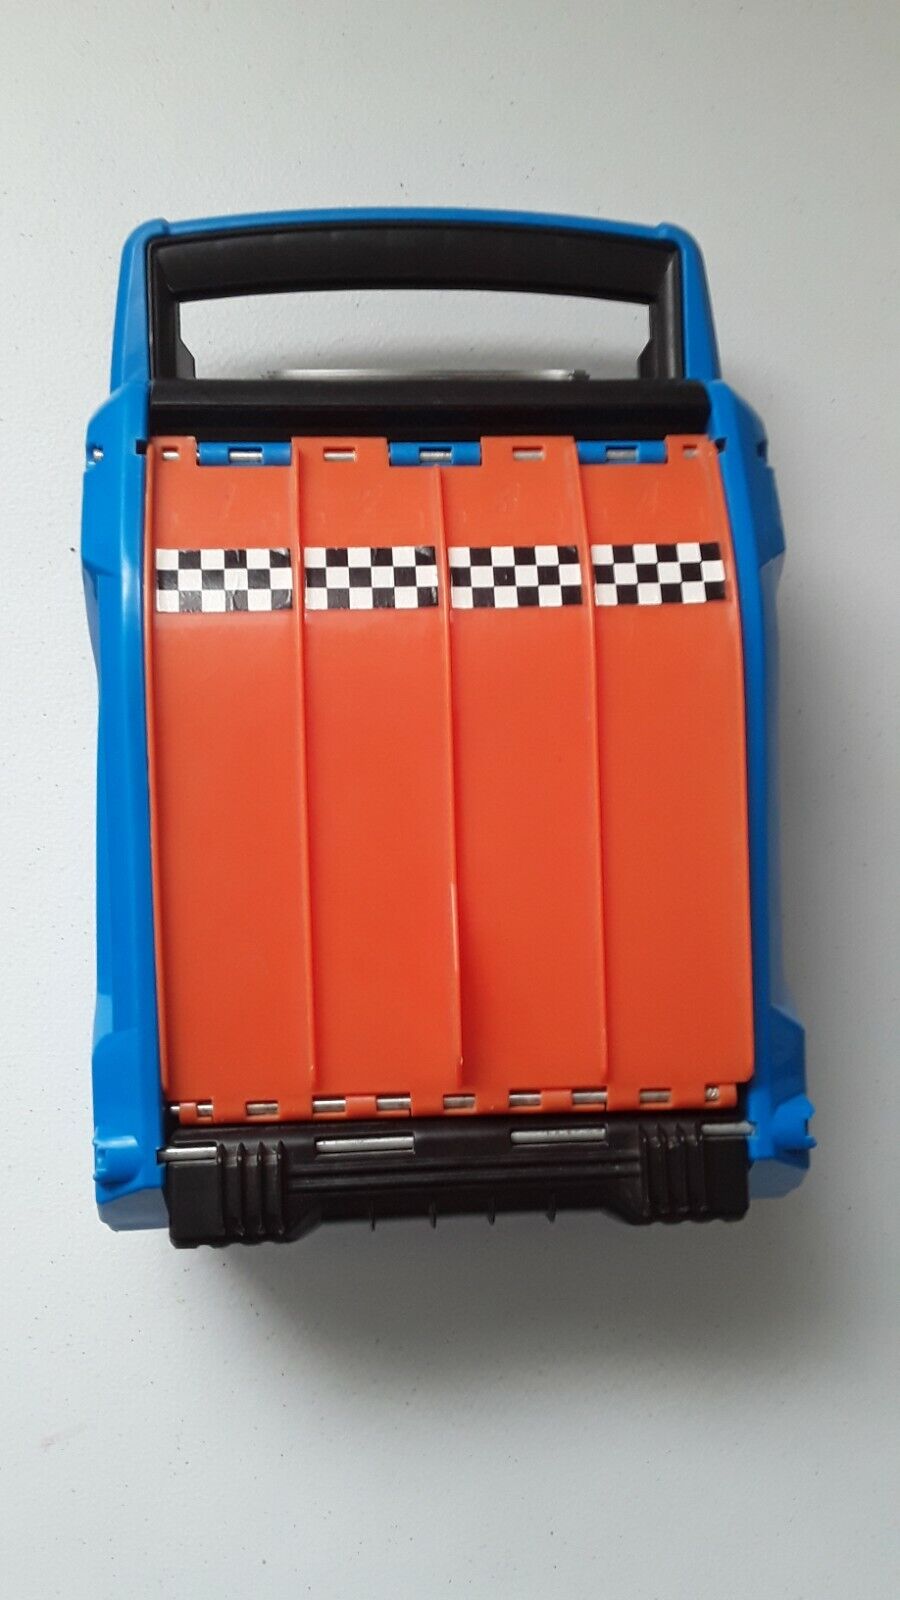 Hot Wheels 4 Lane Track20 Car Storage Case Way to Fast Carrying Race HWCC4 for sale online 